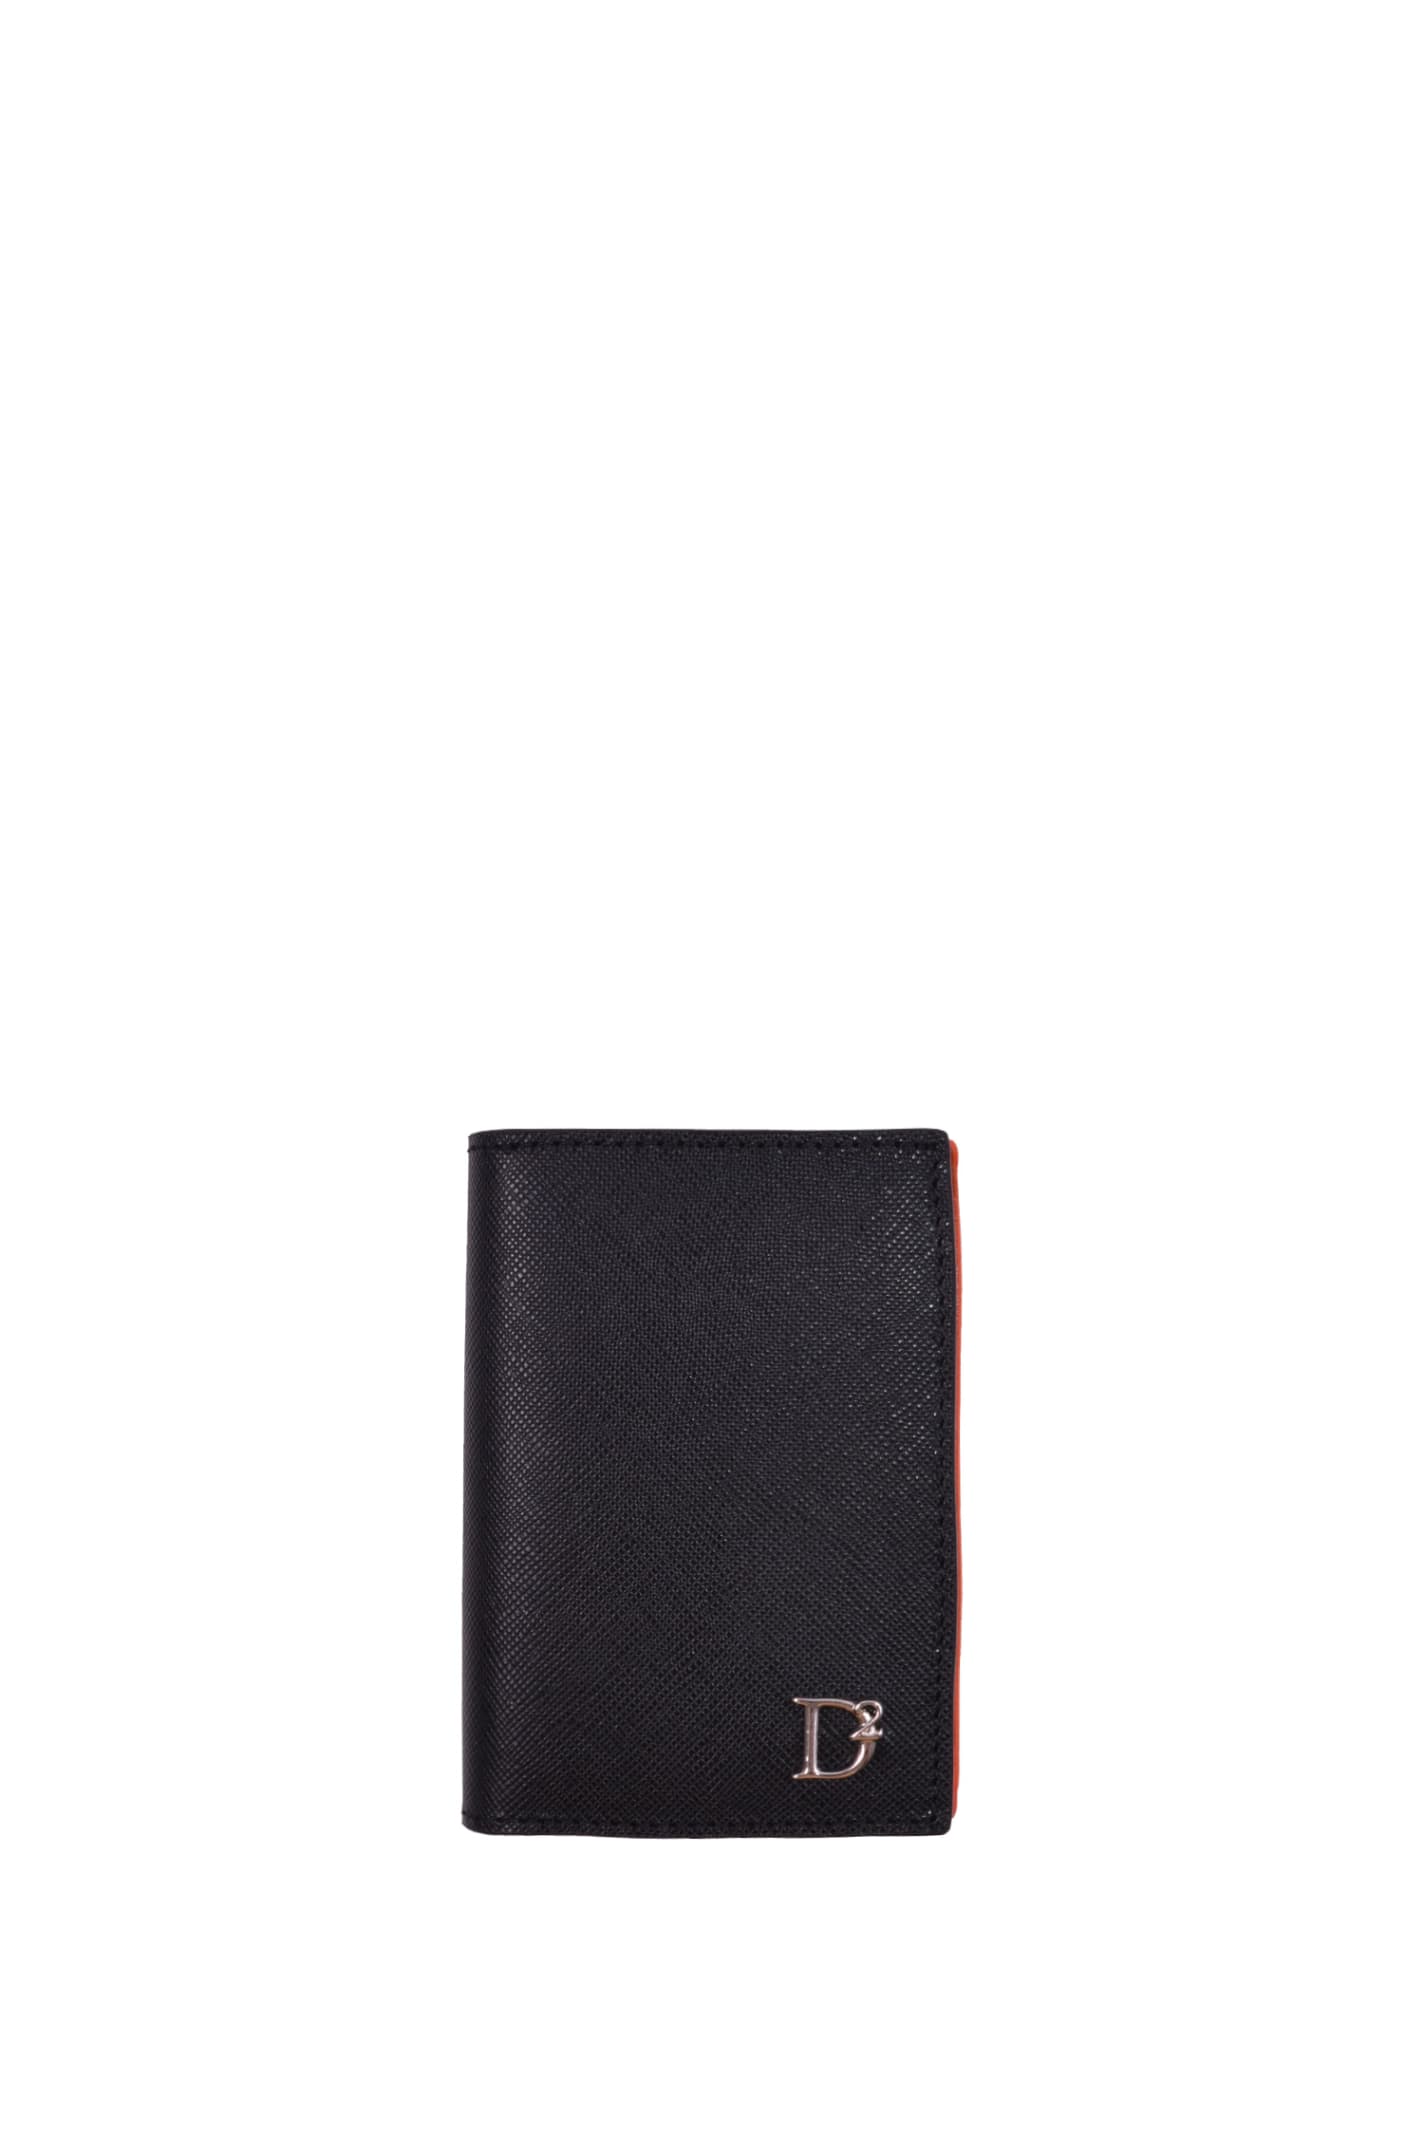 DSQUARED2 LEATHER CARD HOLDER